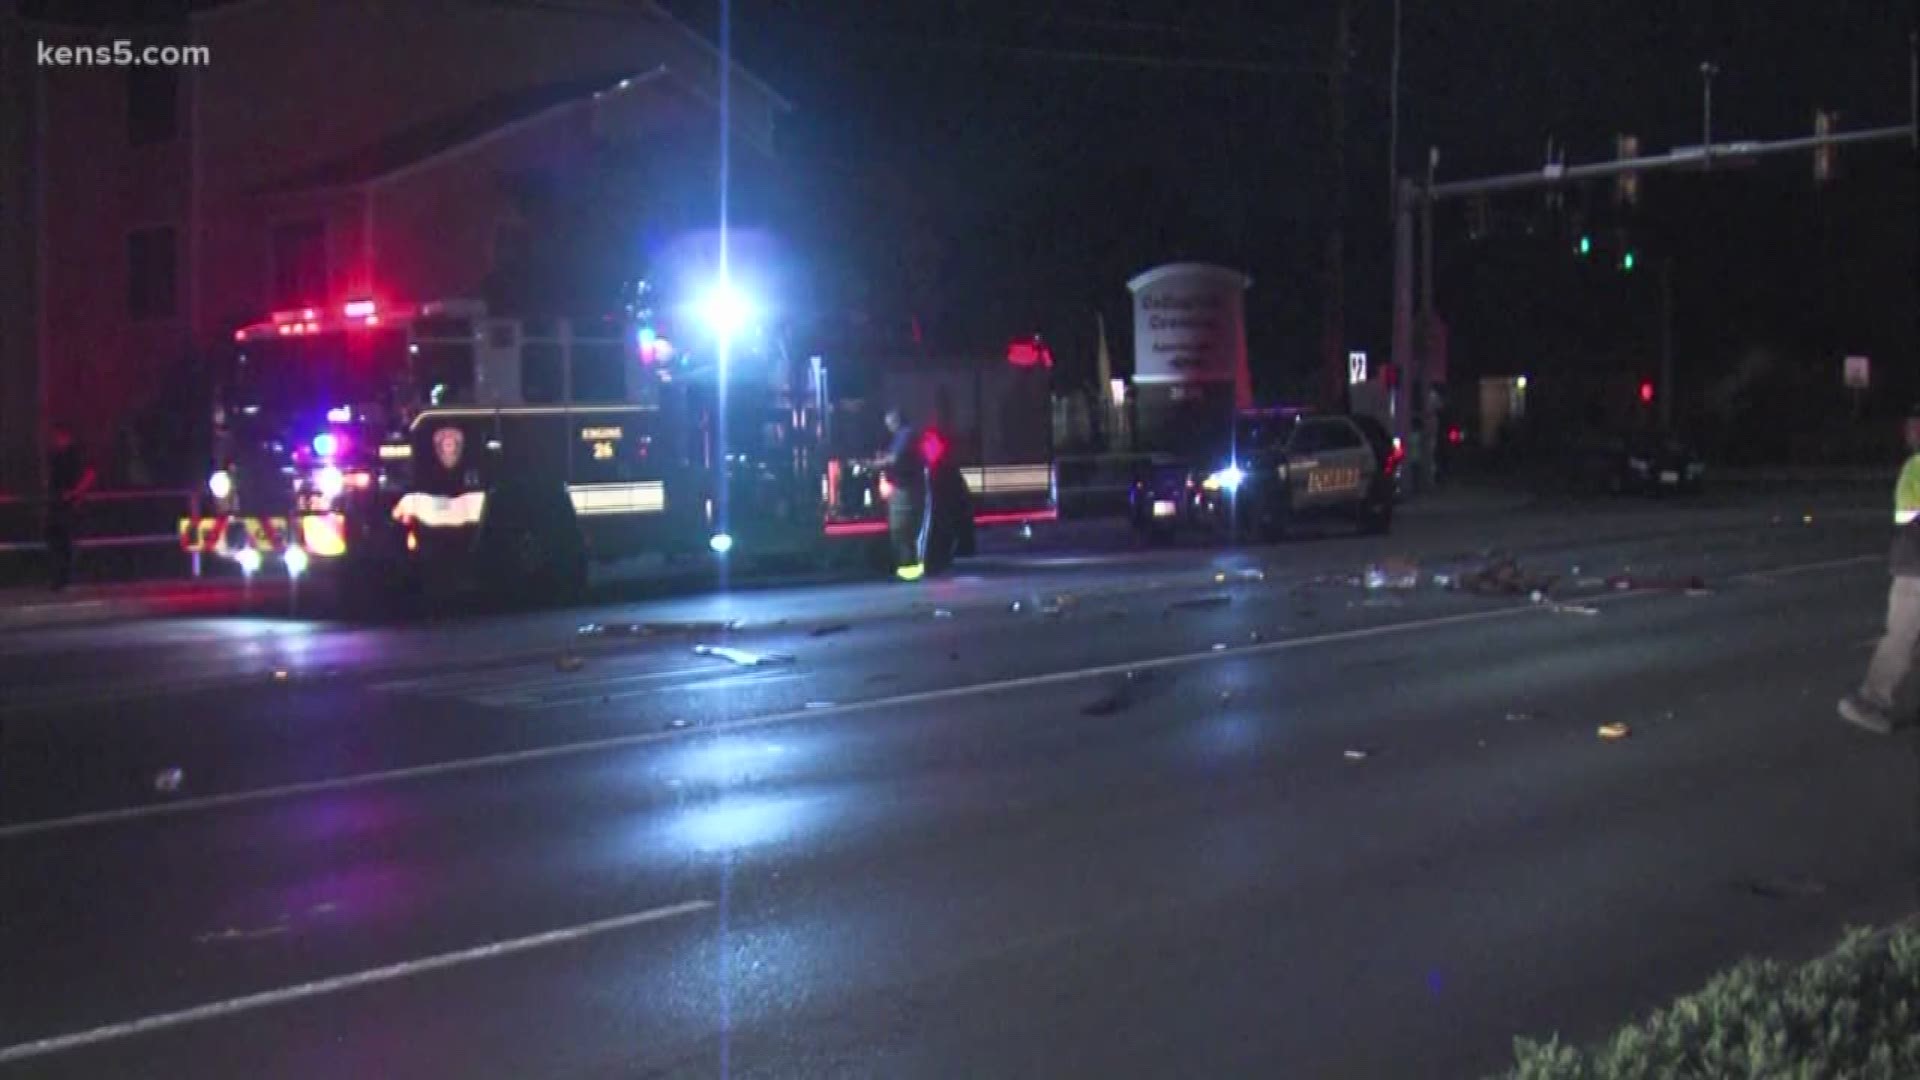 Police say a man's arm was cut clean off when he rear-ended another car on the northwest side late Friday night.